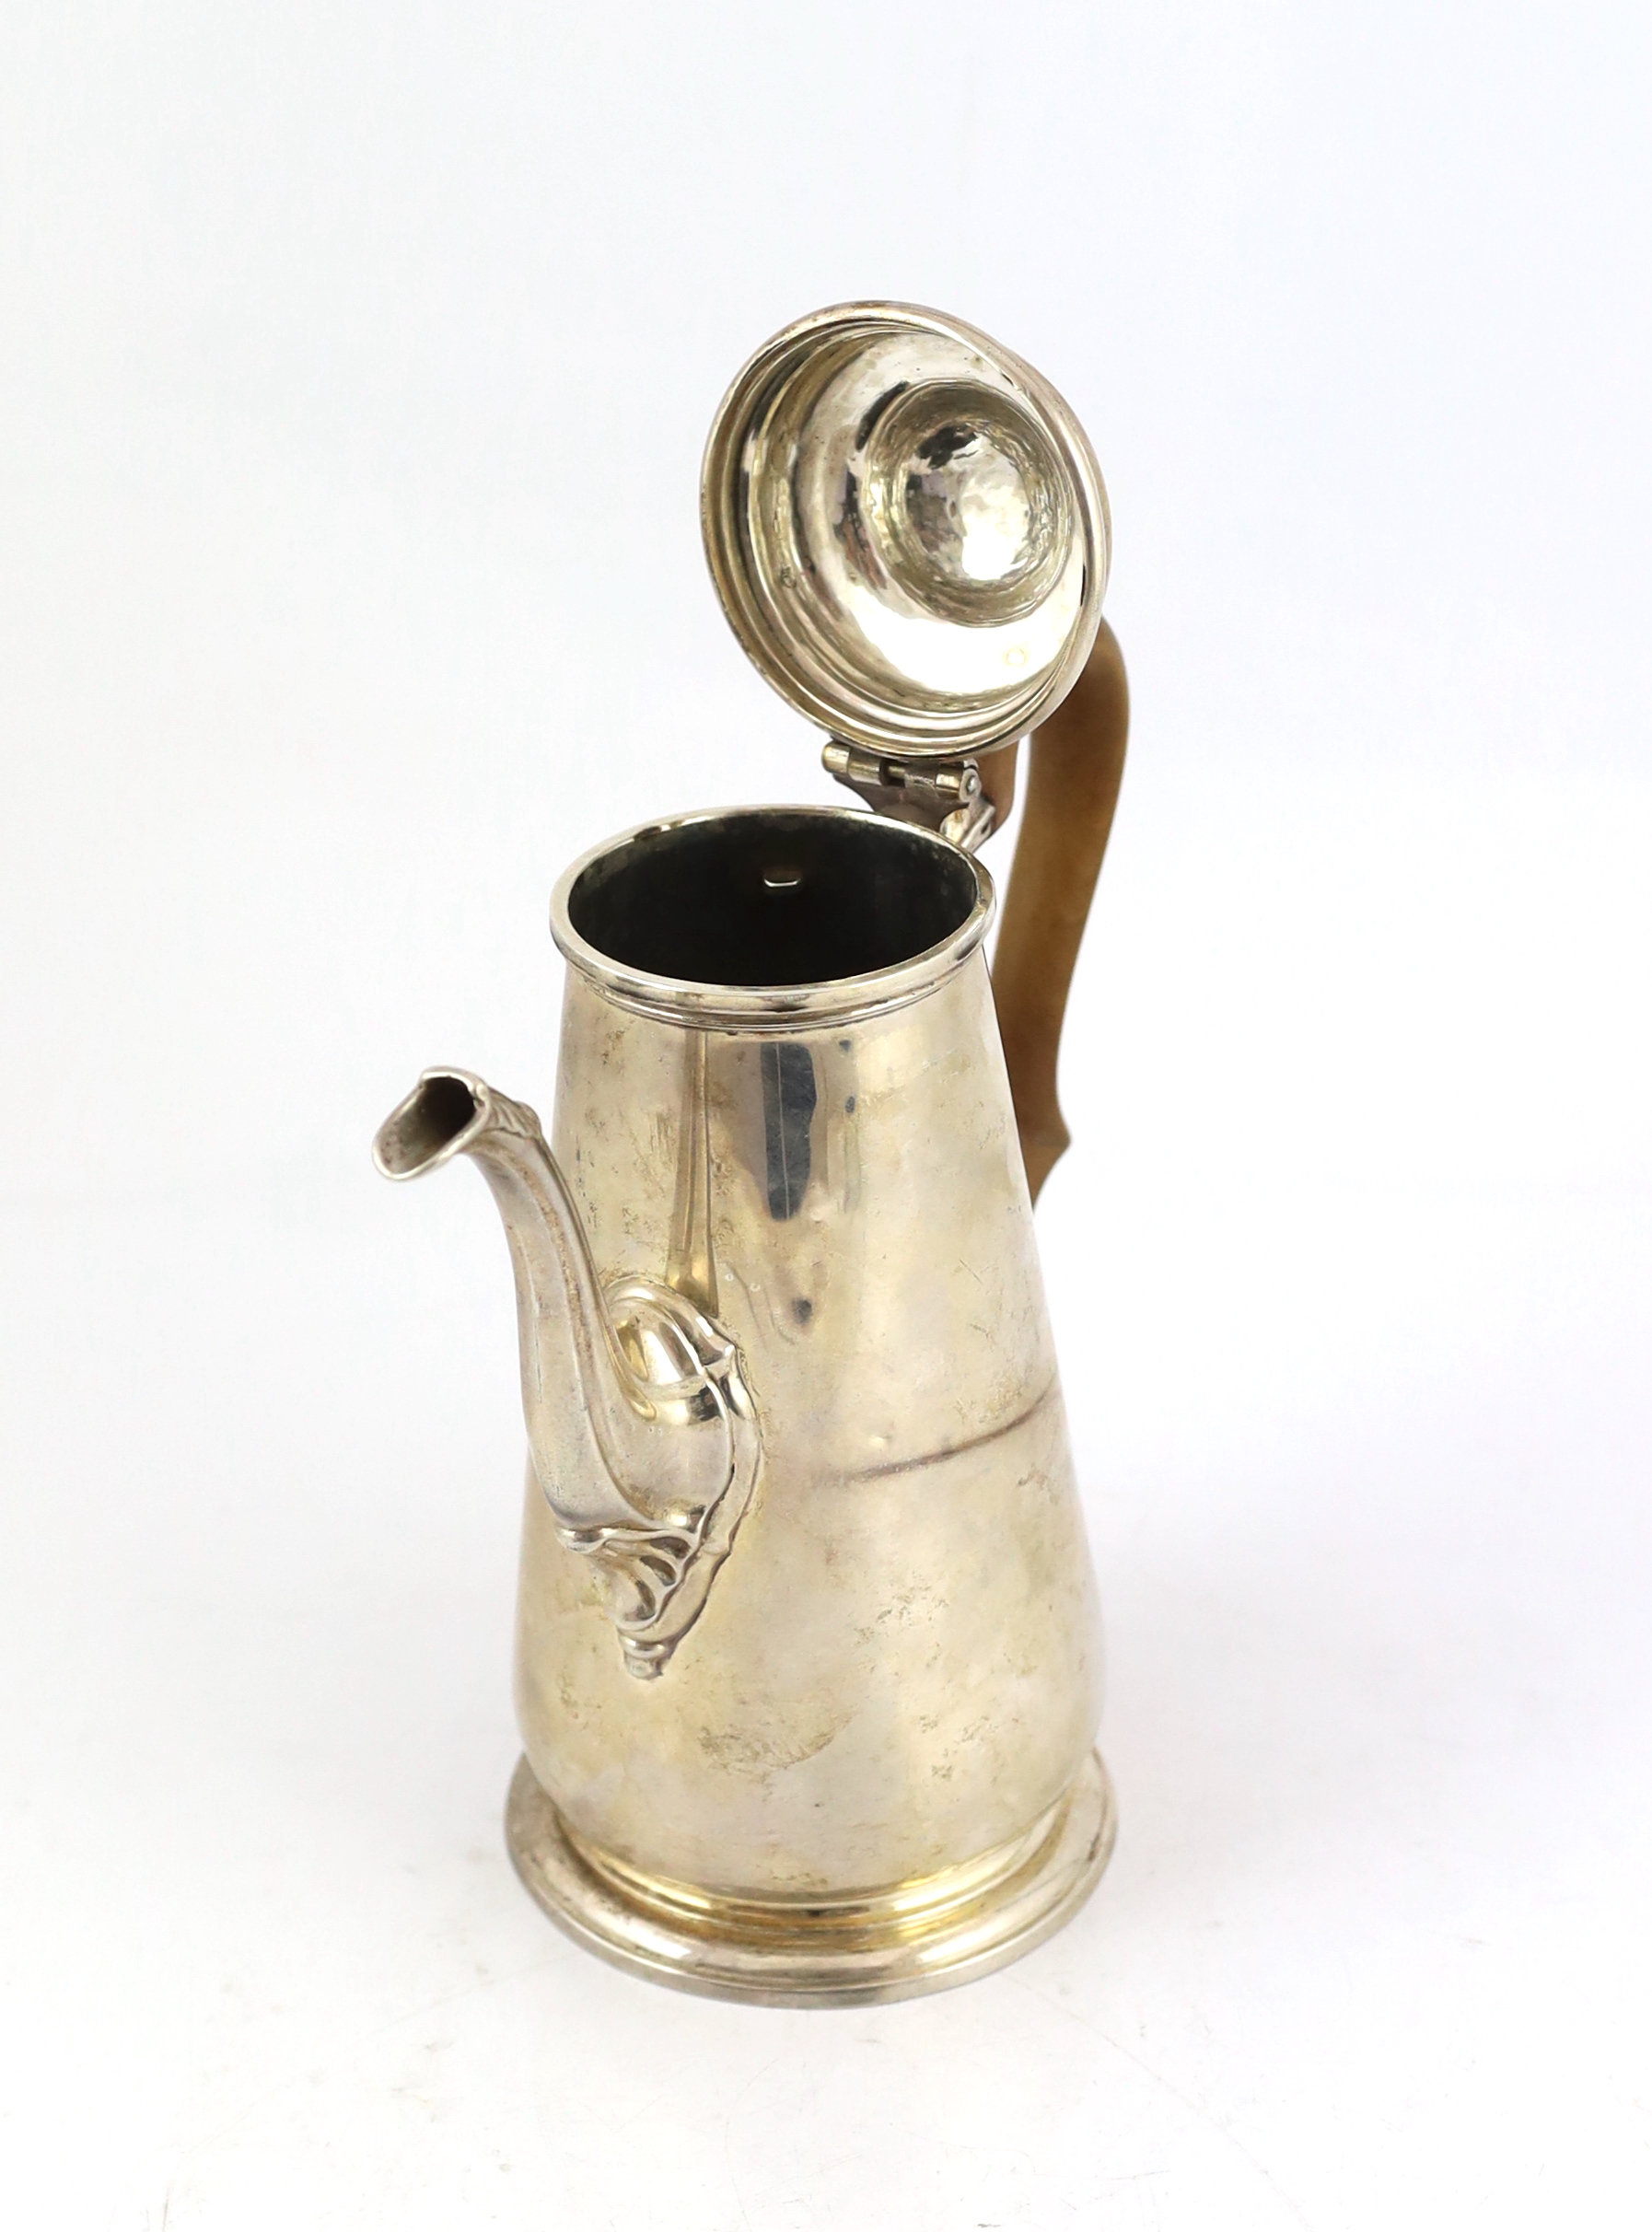 A George II silver coffee pot and hinged cover with turned finial, William Williams I